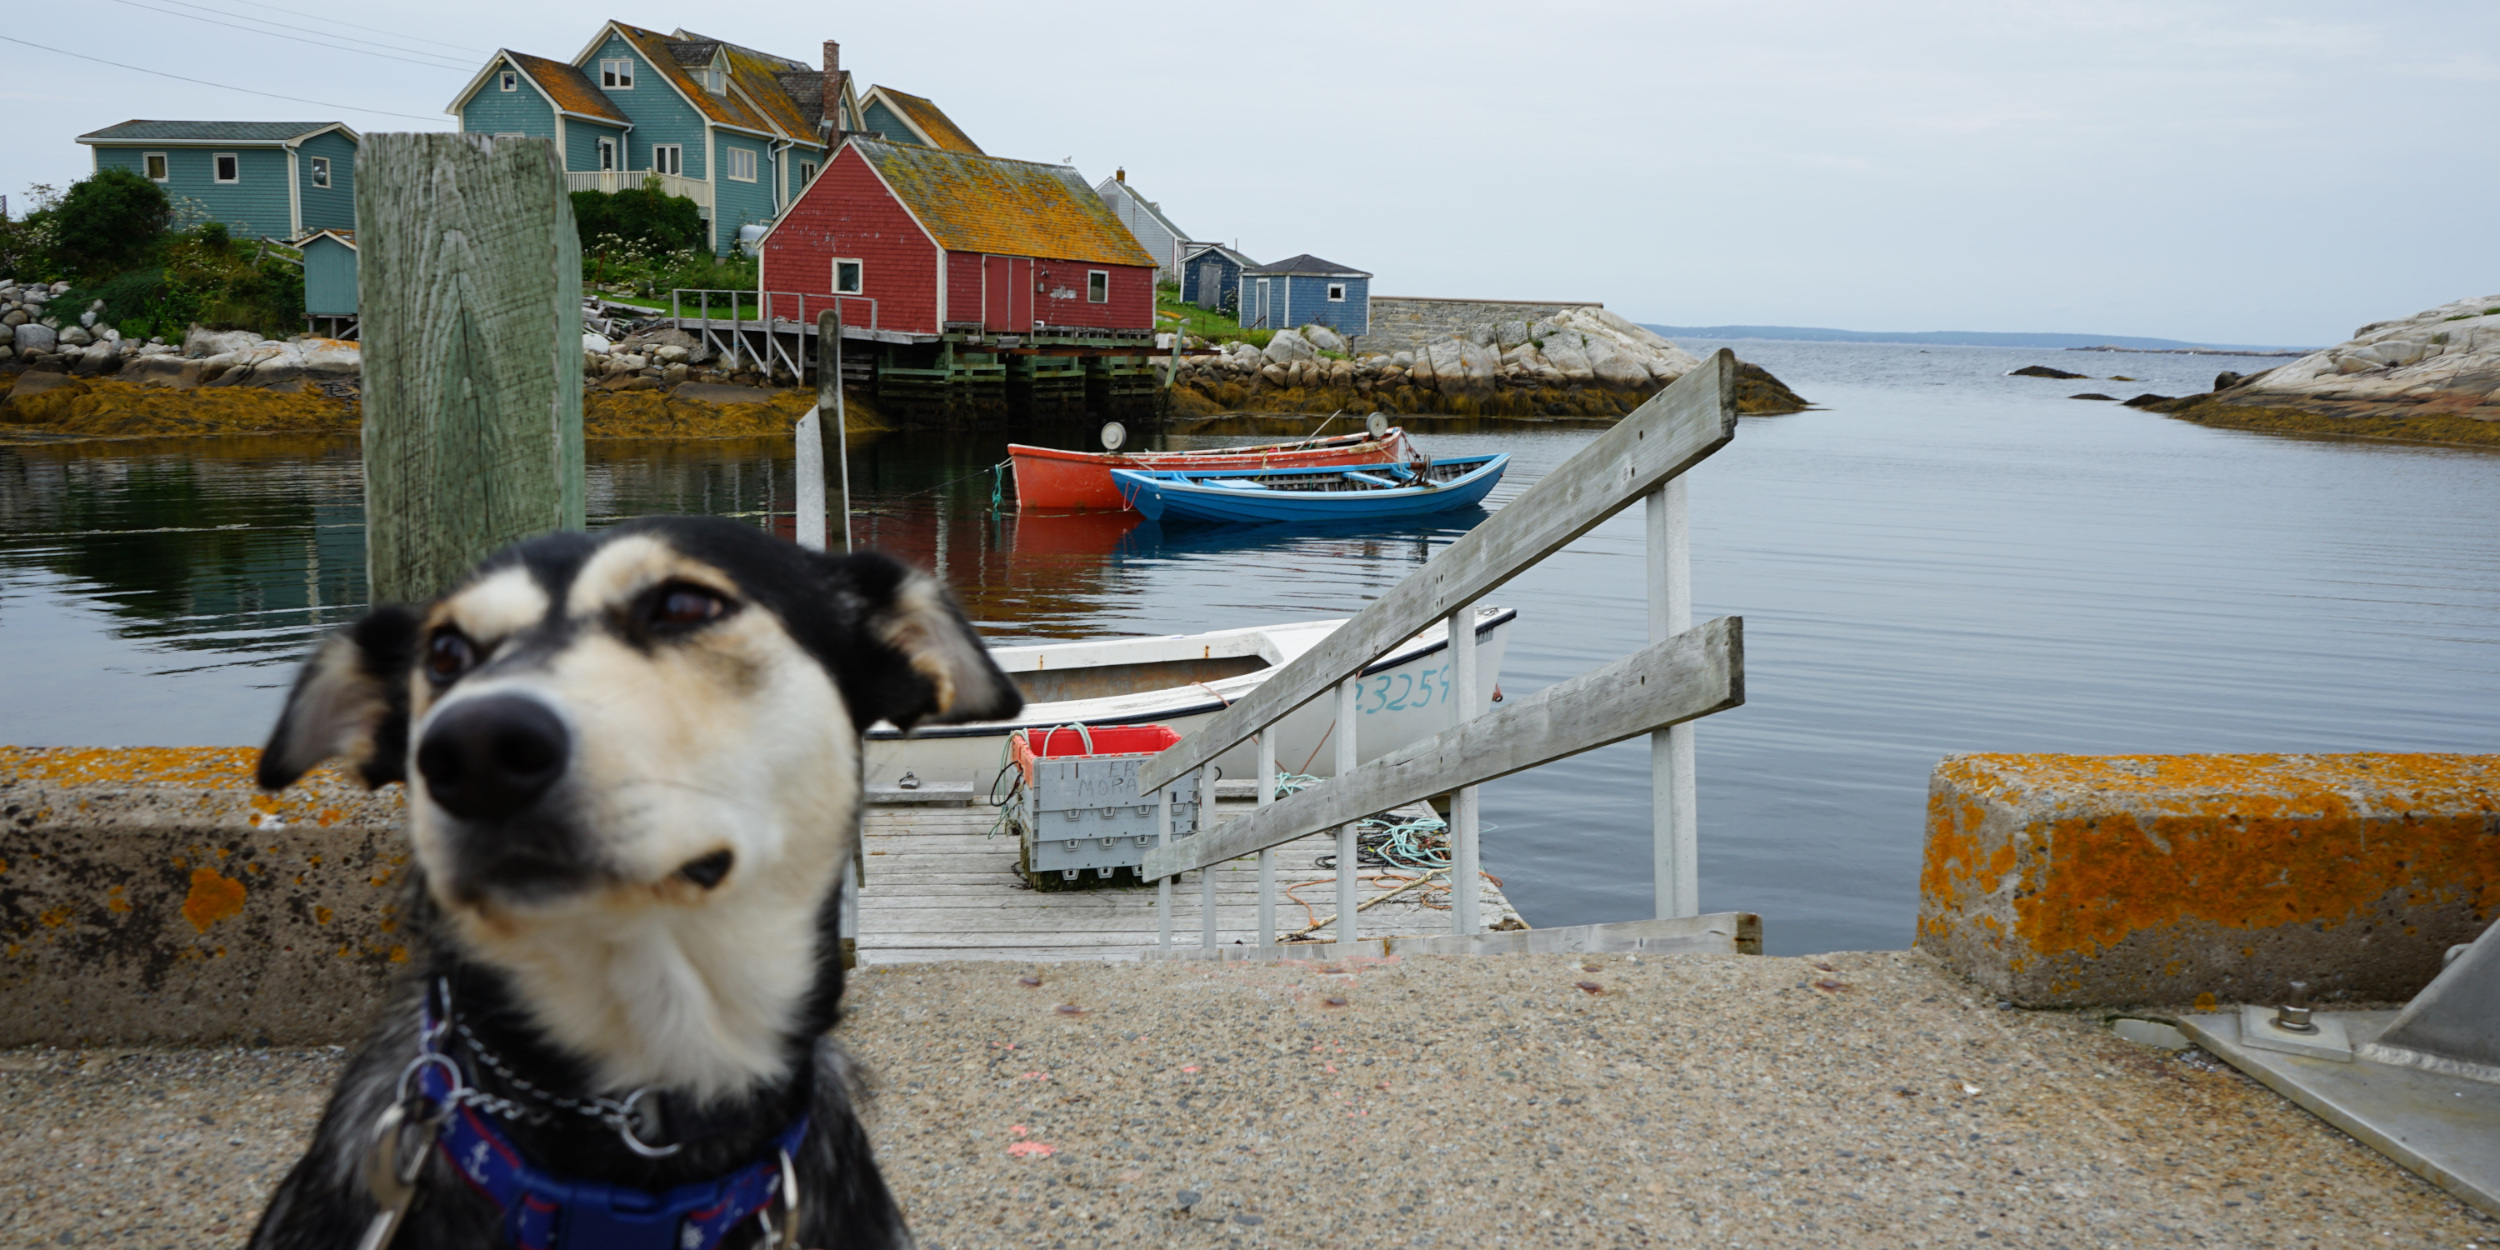 A dog sitting on a concrete pier in the town of Peggy's Cove, Nova Scotia.